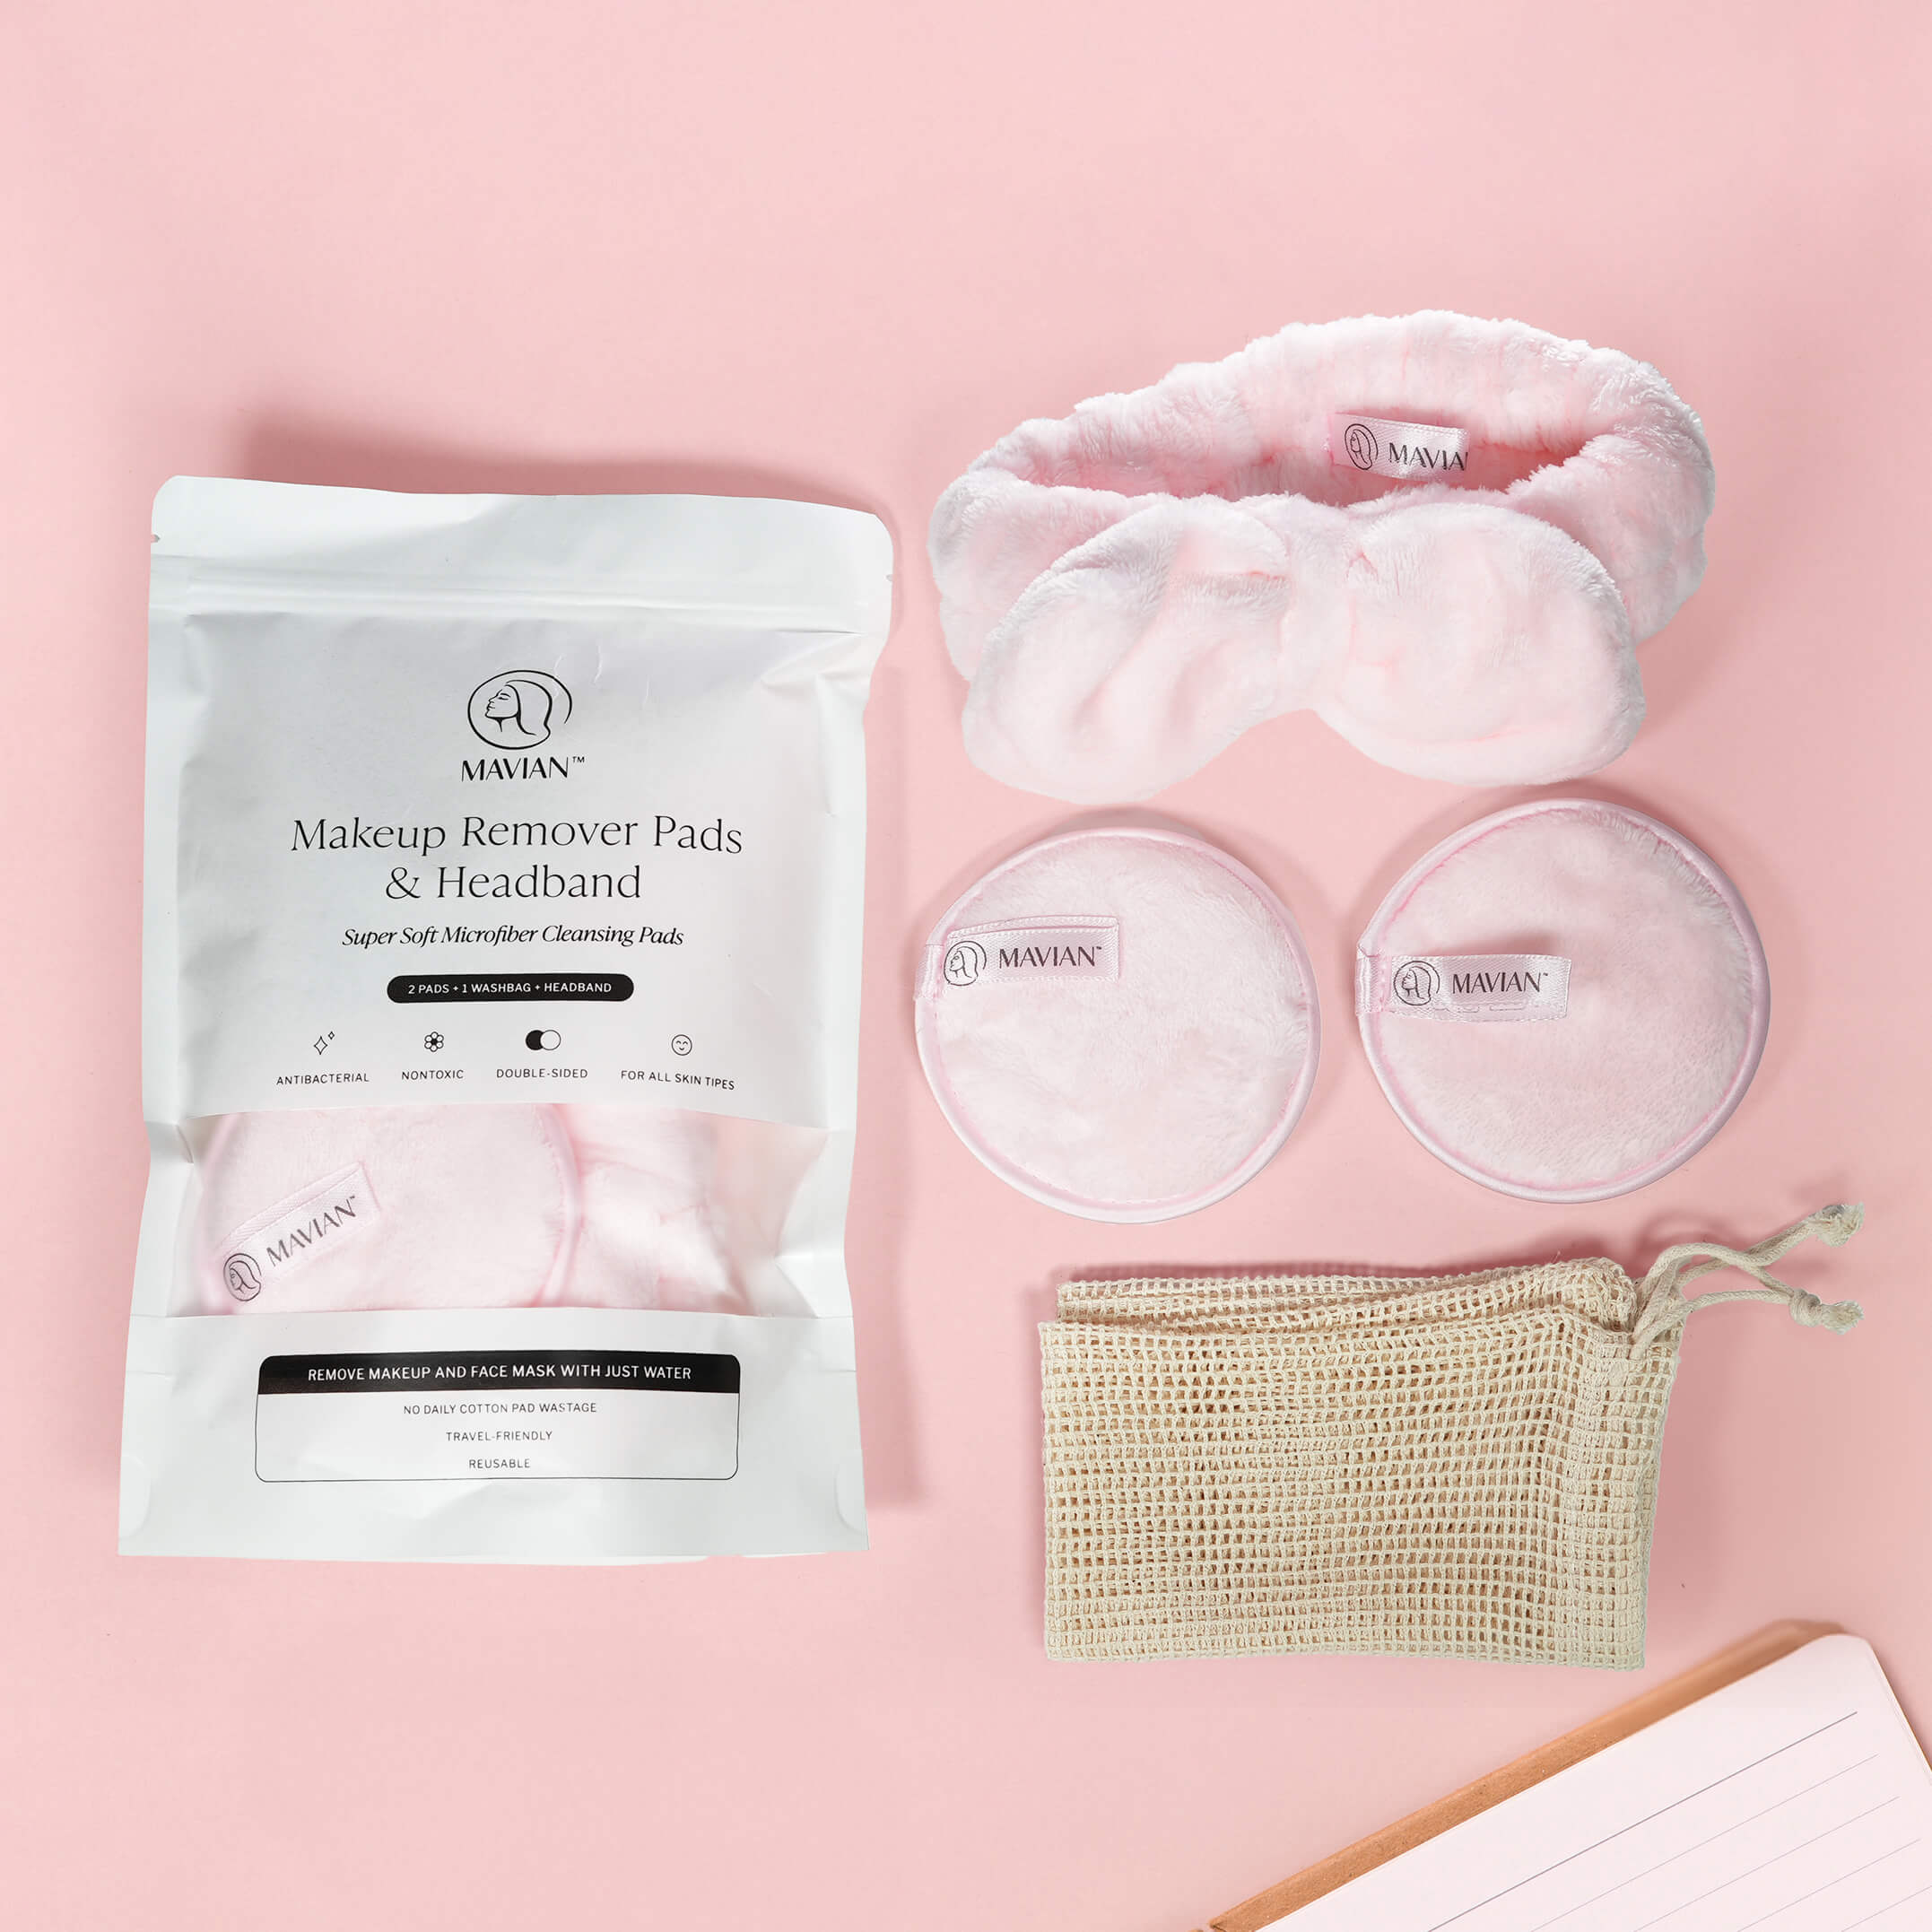 Makeup remover pads from Mavian Beauty